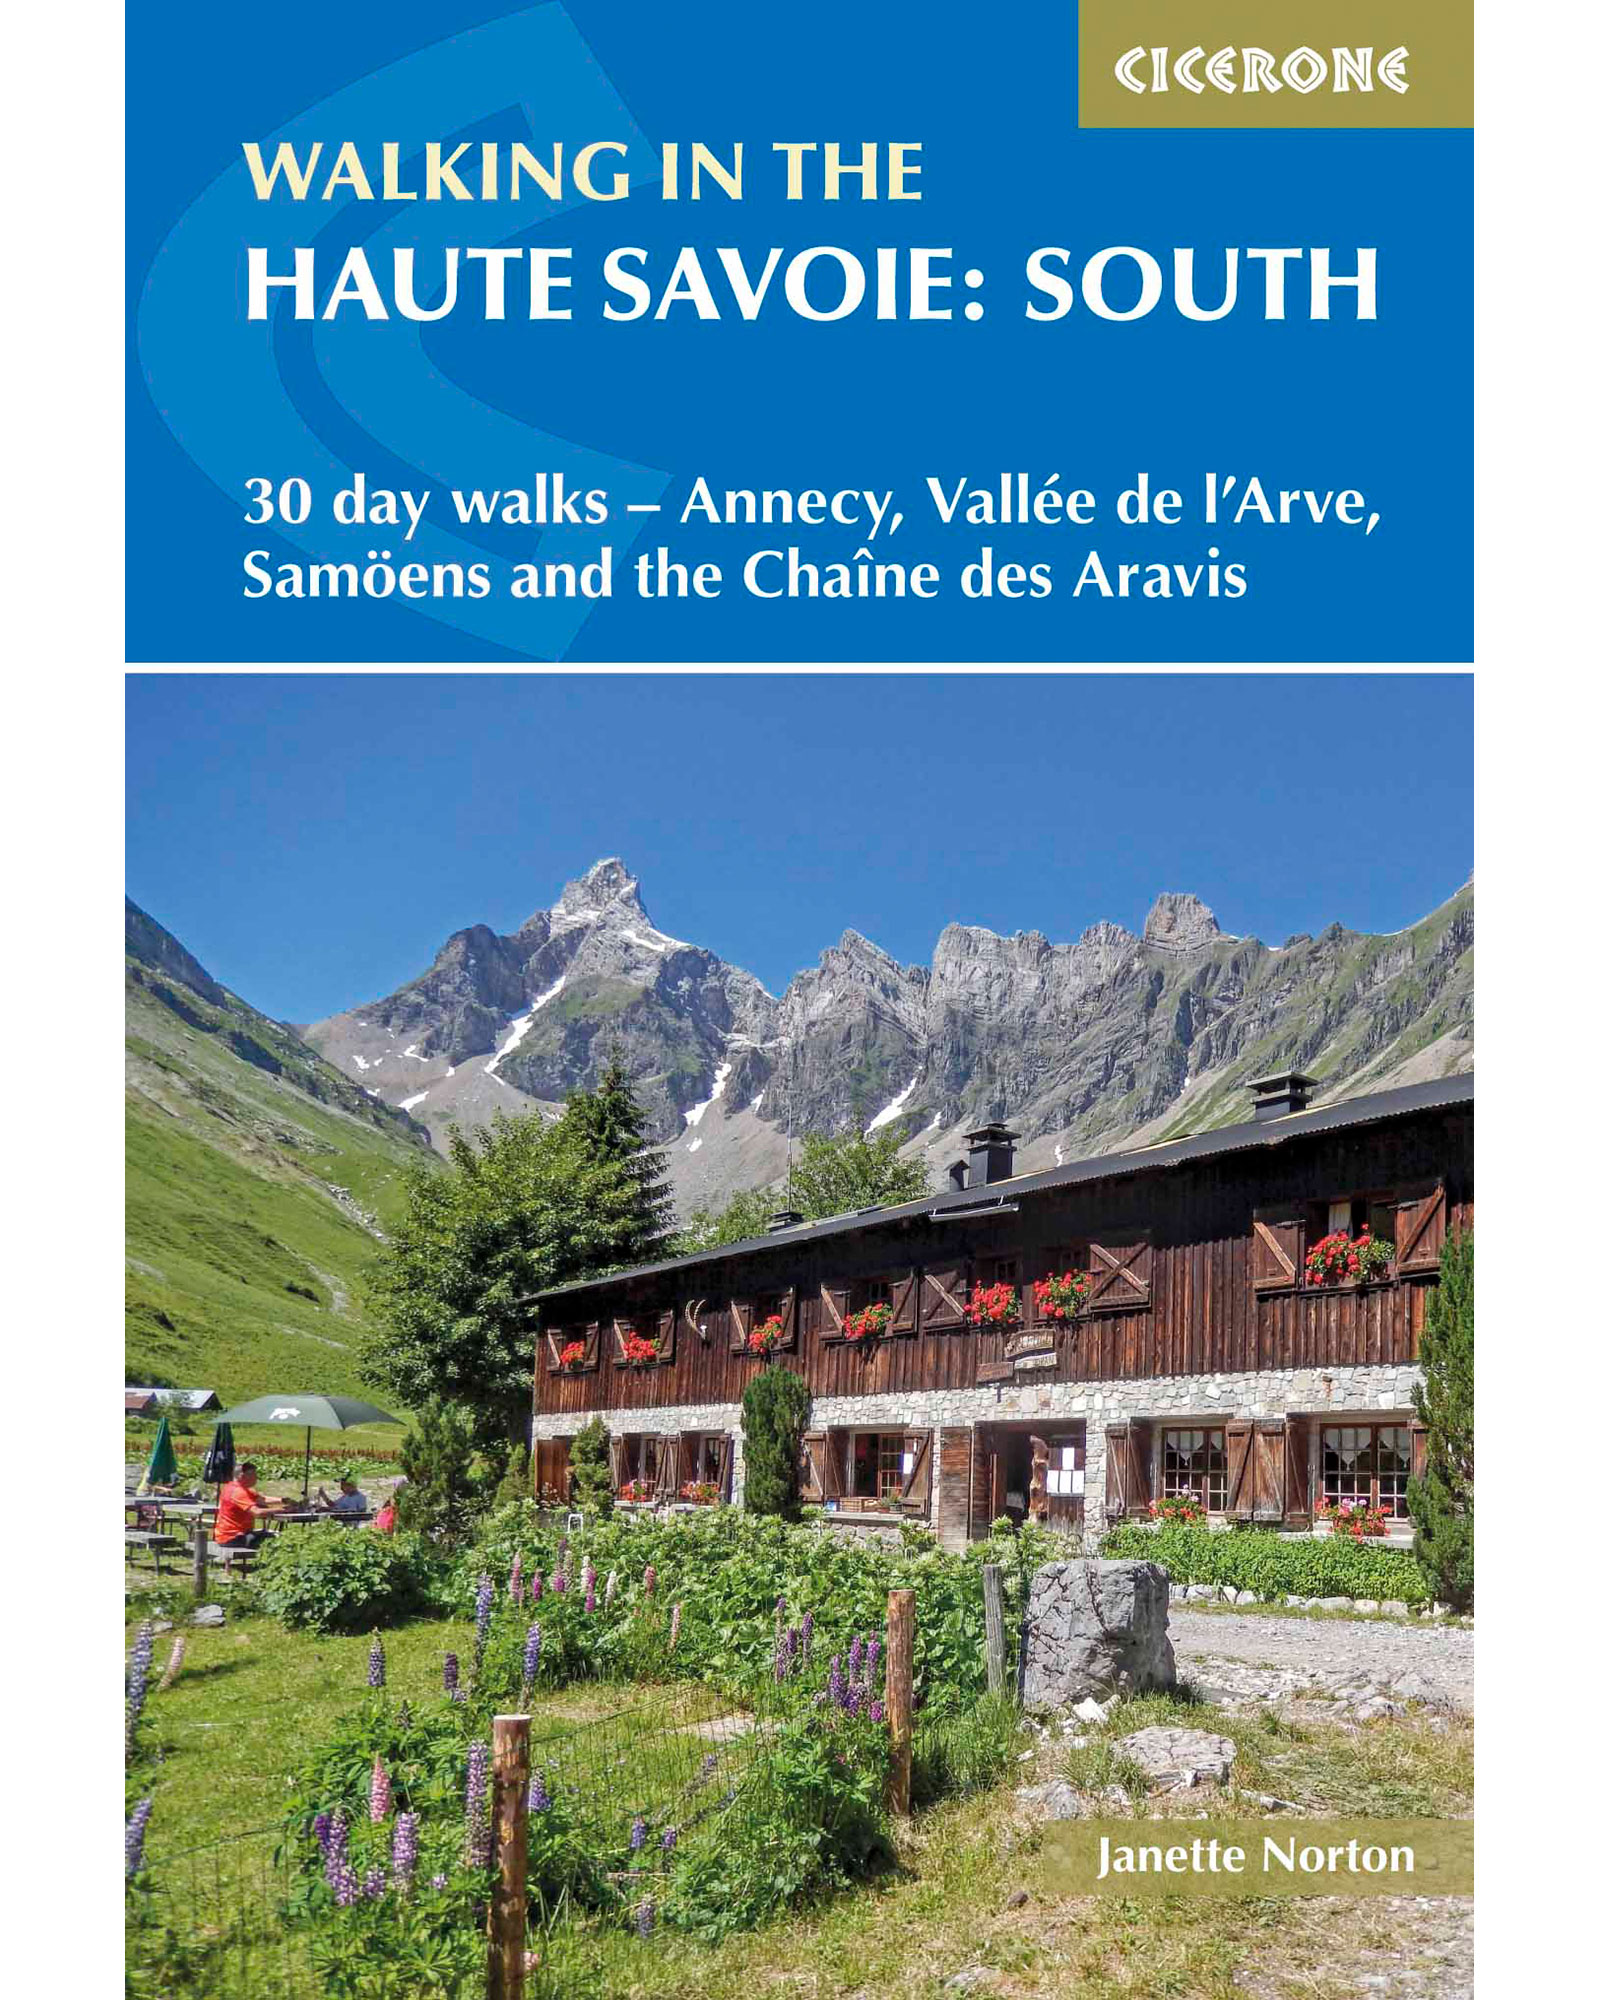 Cicerone Walking in the Haute Savoie: South Guide Book